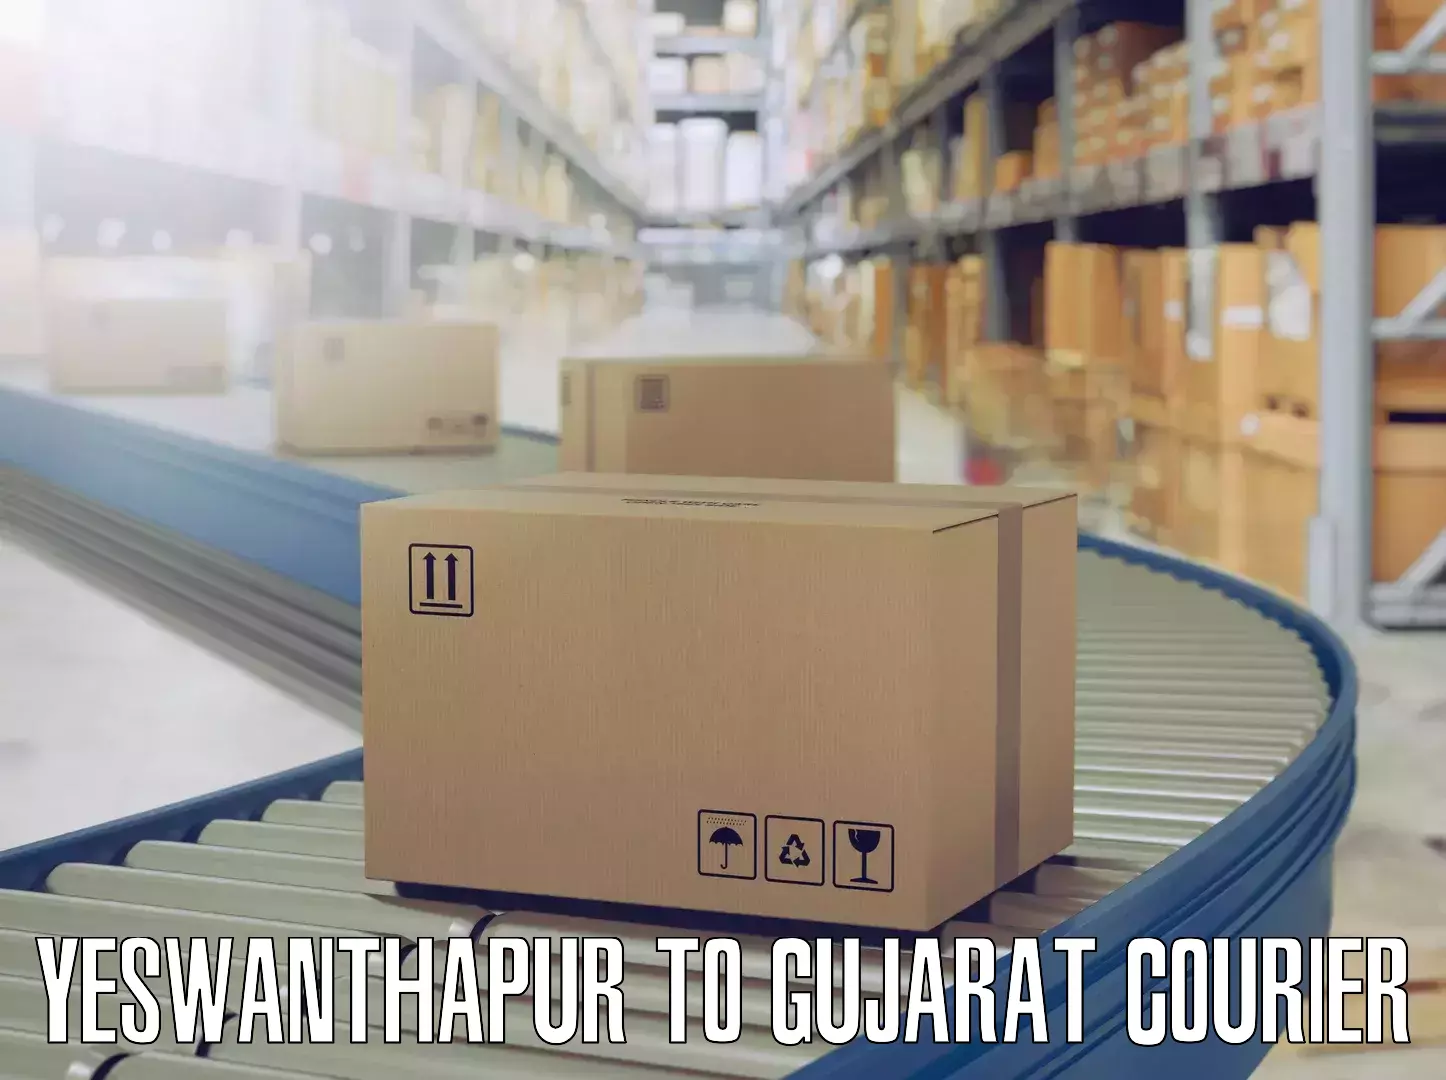 Household goods transport service Yeswanthapur to Tarapur